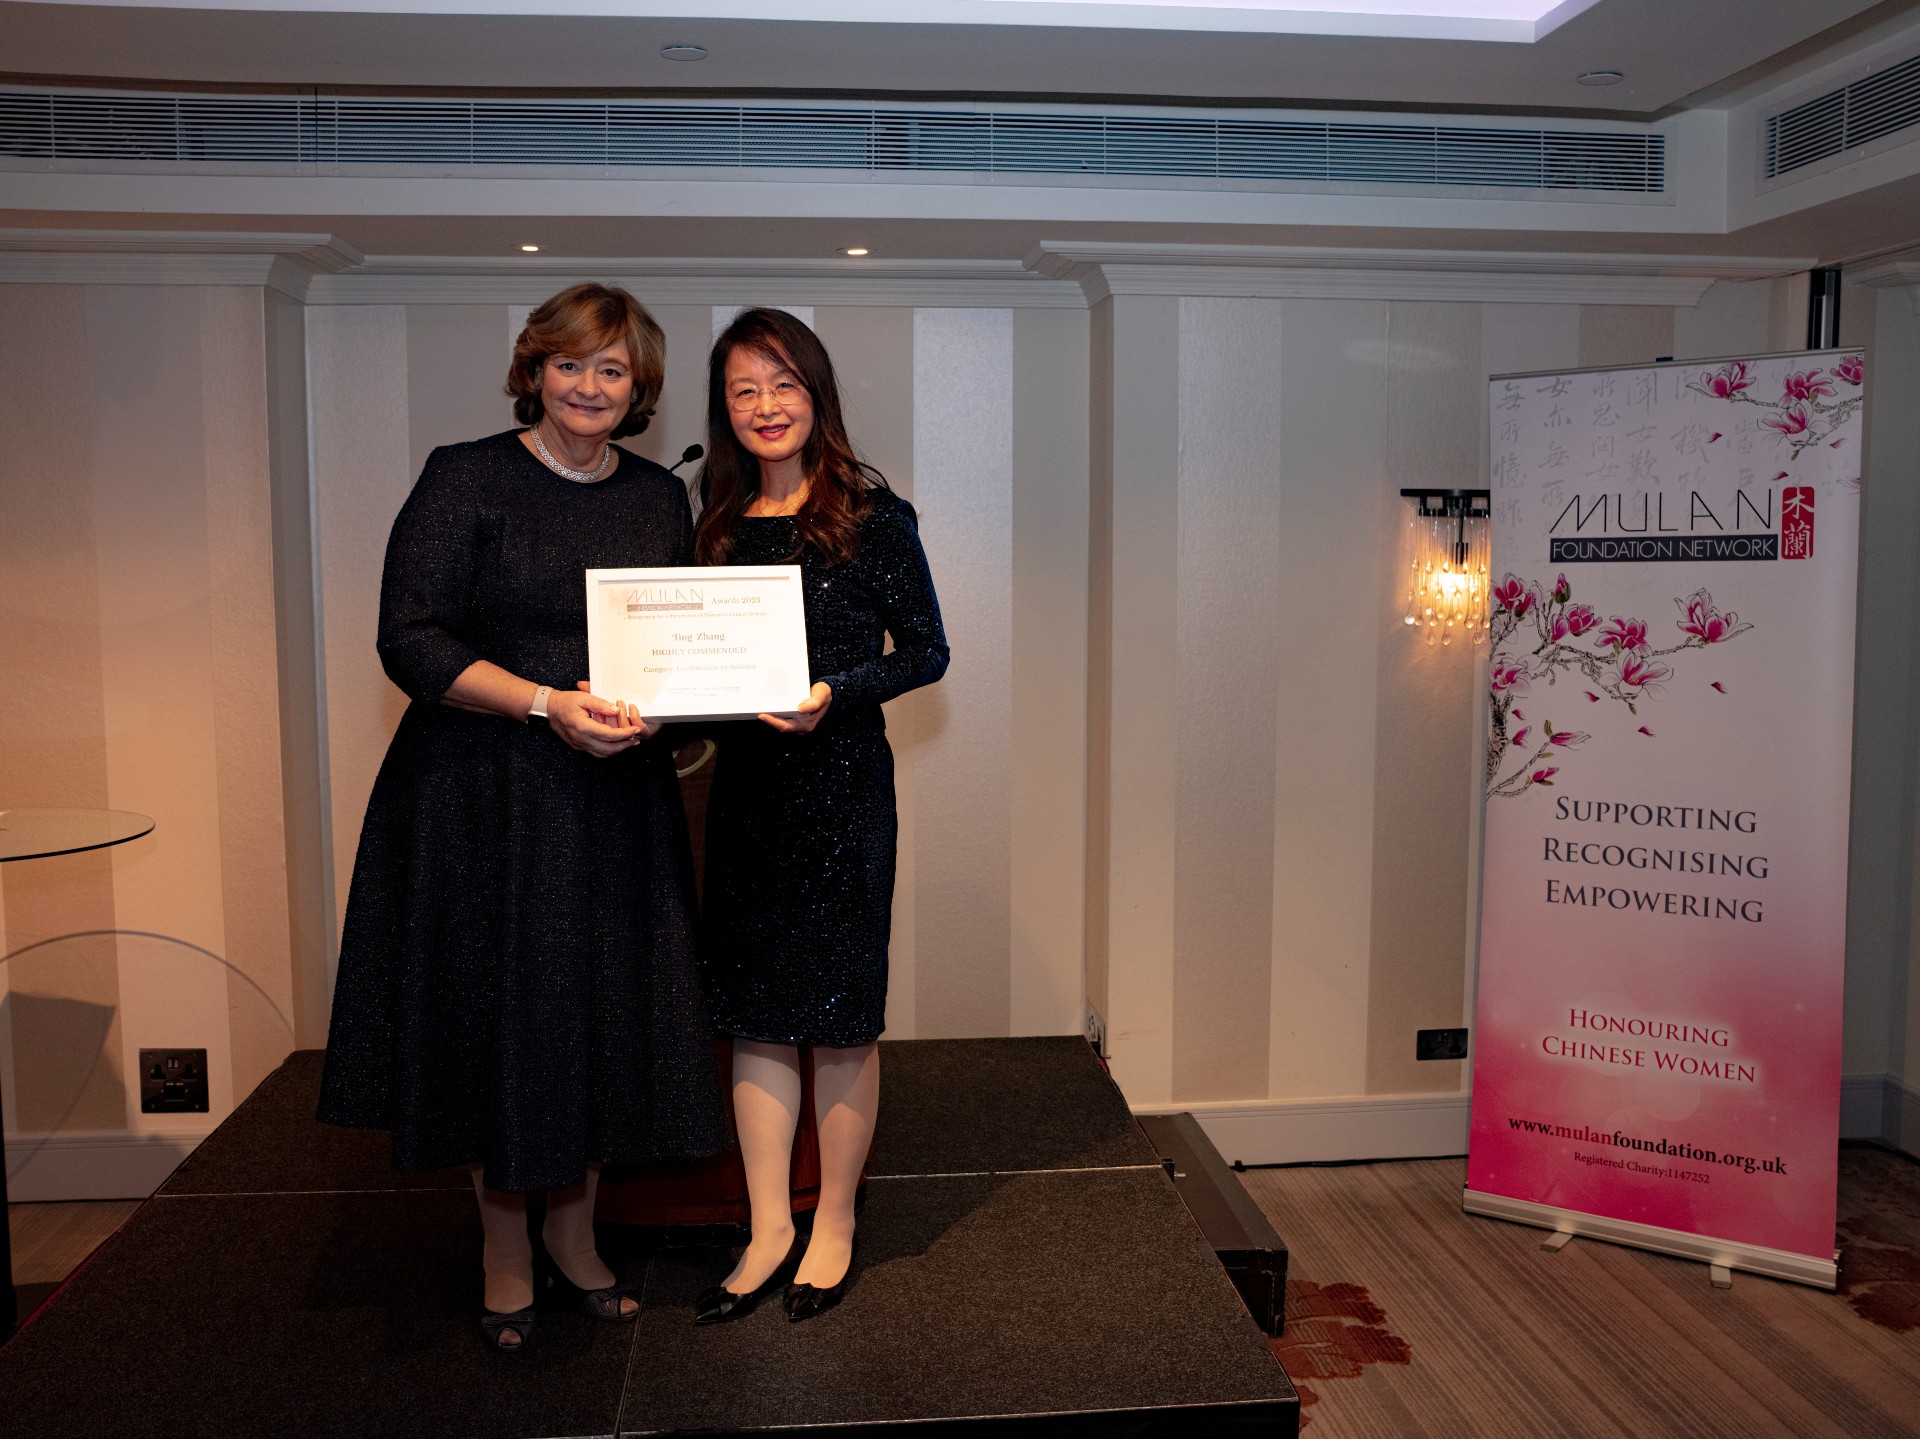 Mulan Award for Ting Zhang – an accolade to recognize her contributions to business